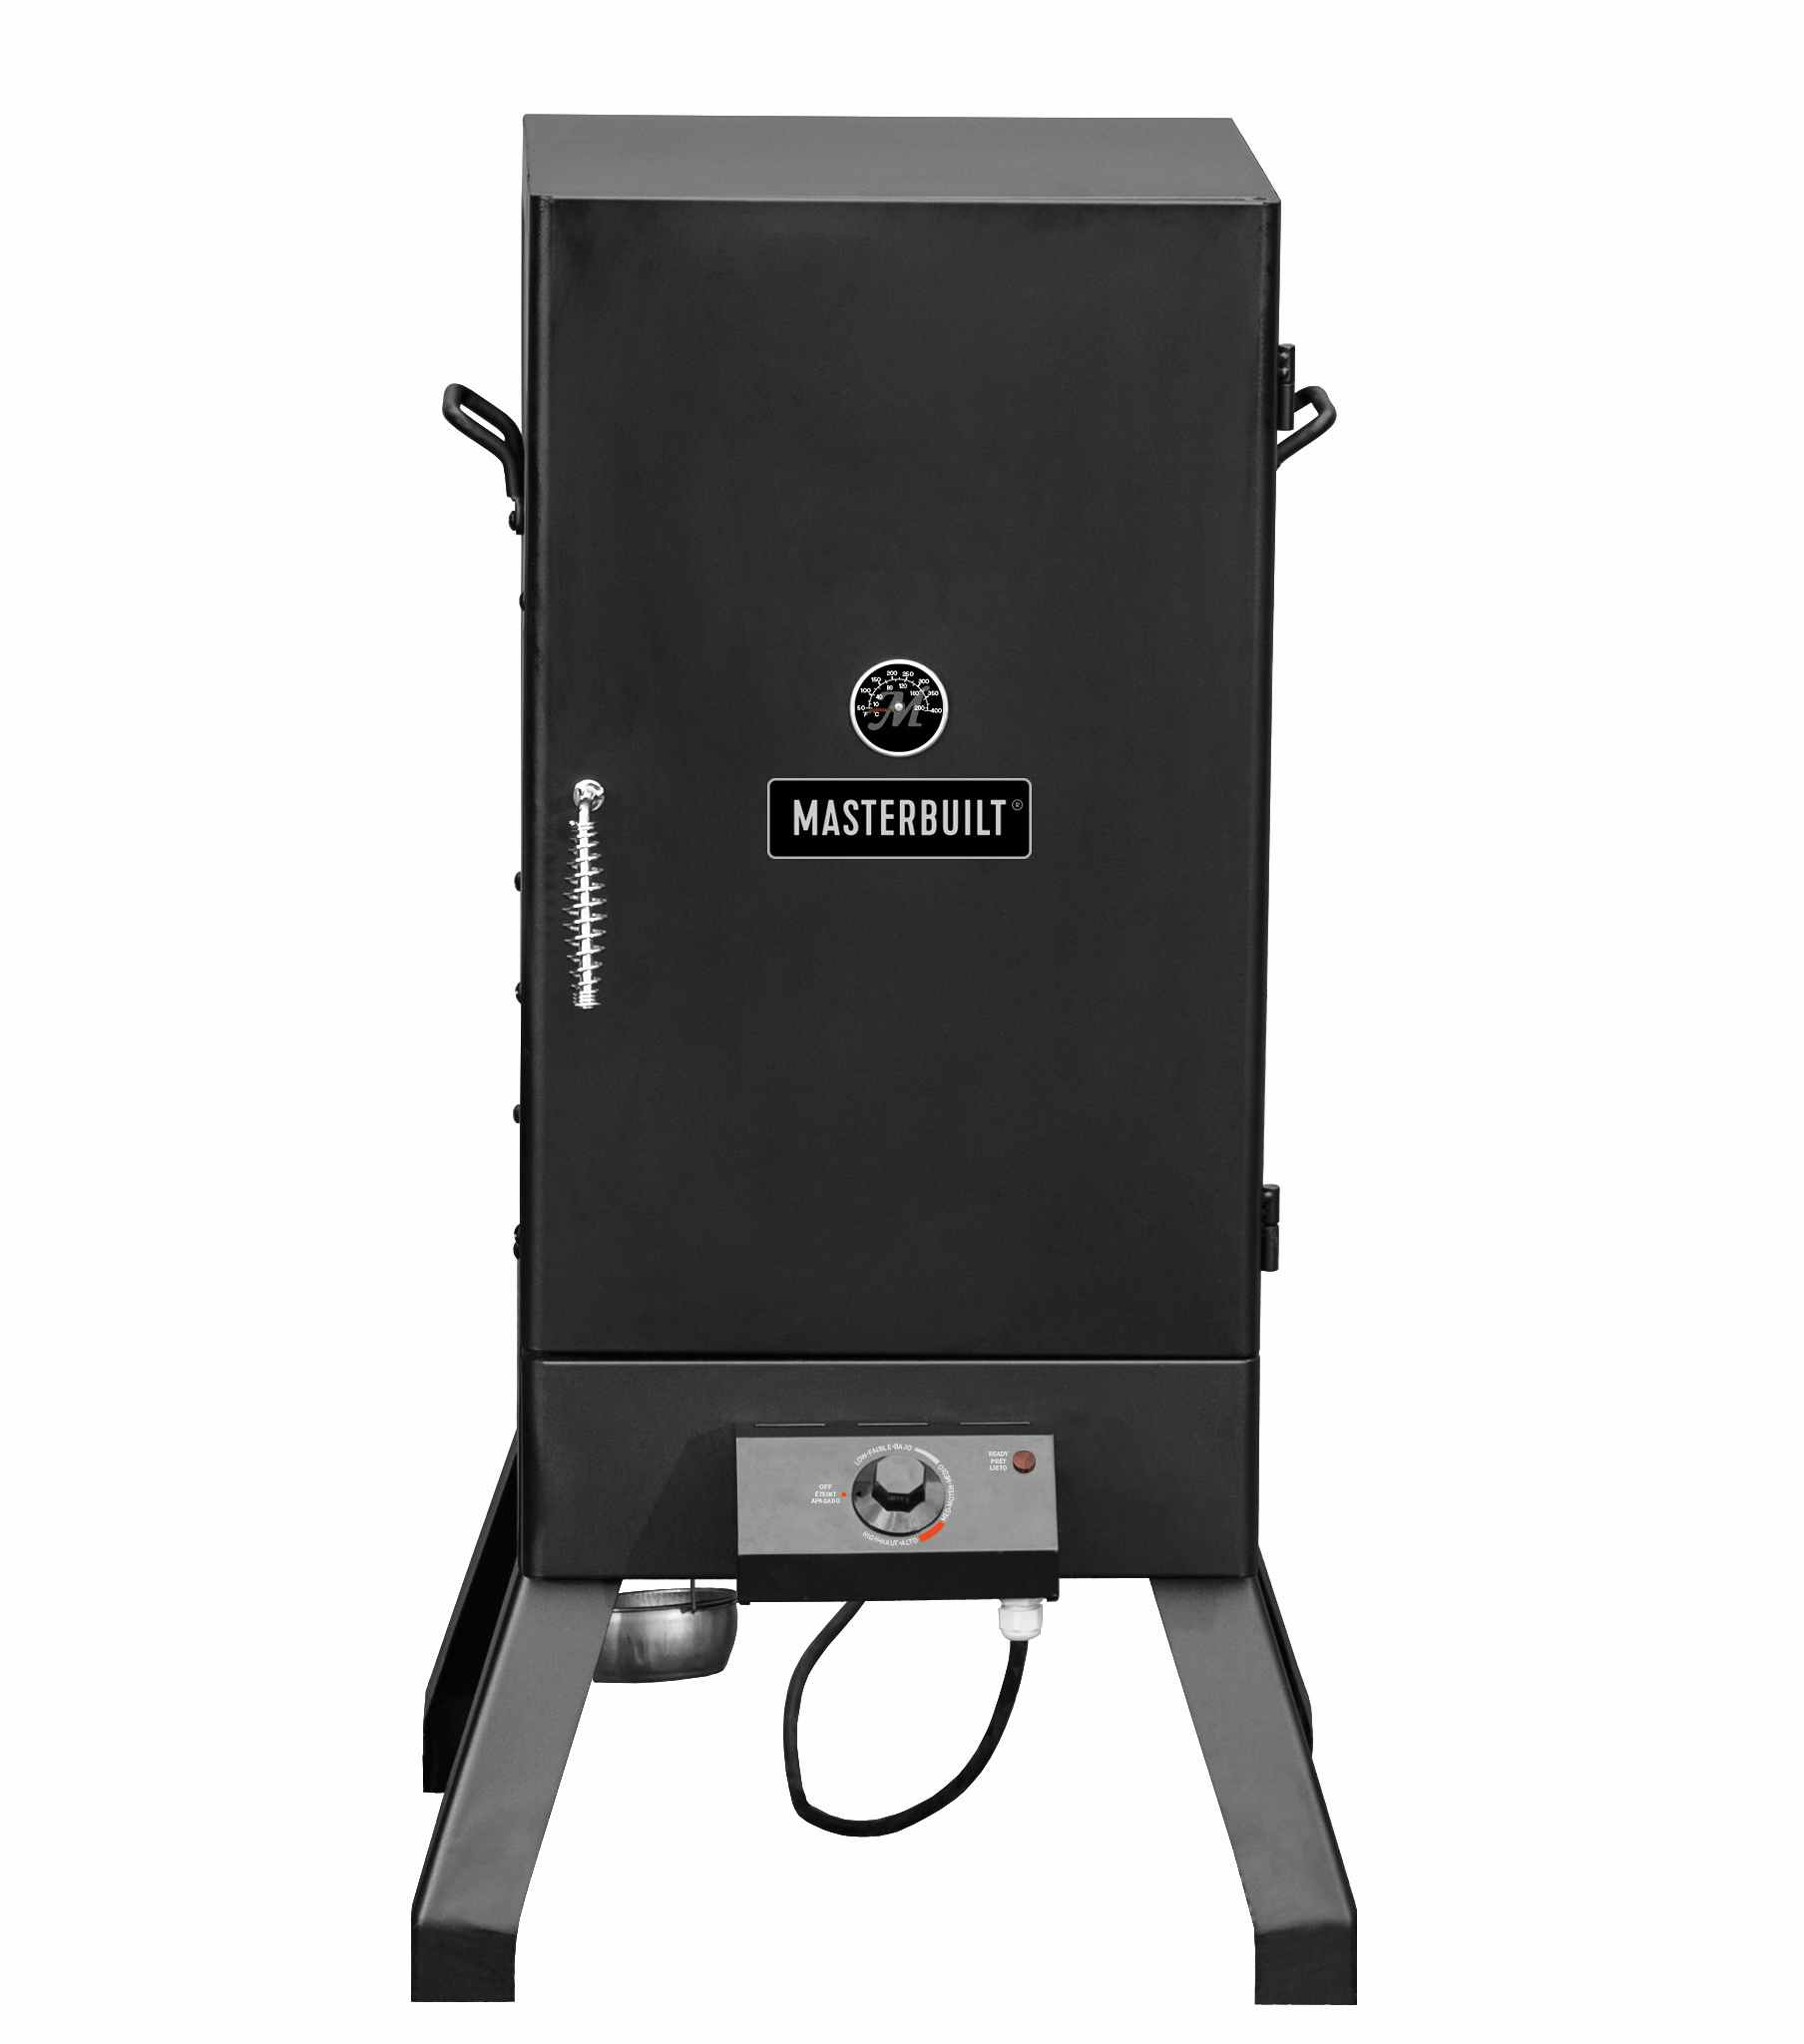 stock photo of masterbuilt electric smoker on a white background